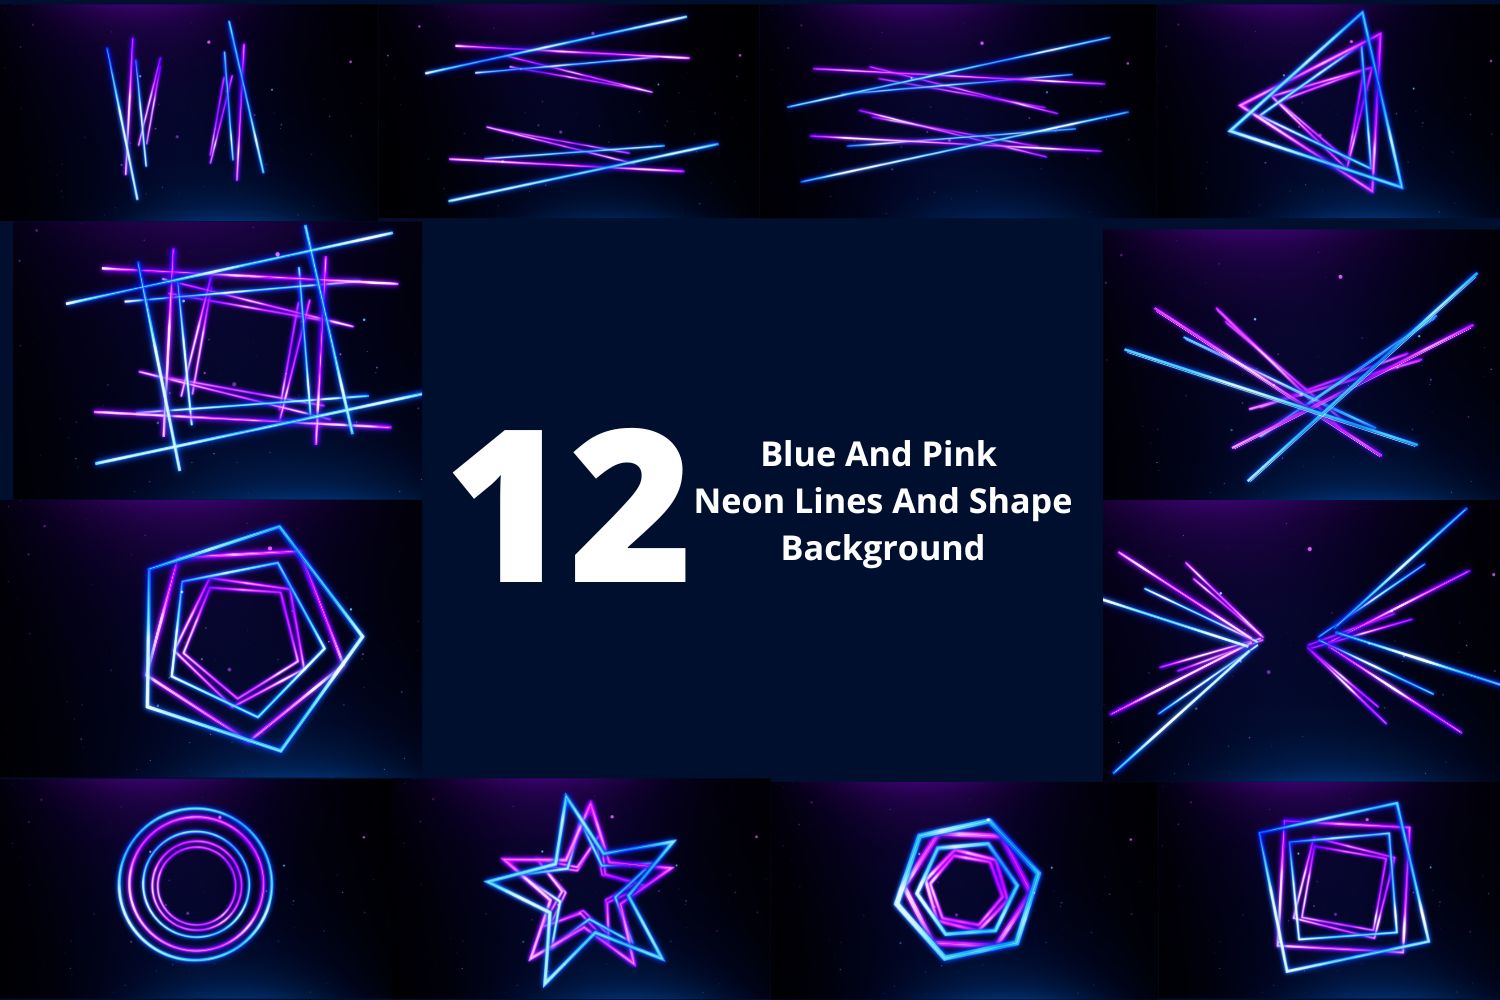 Blue And Pink Neon Lines And Shape Loop Backgrounds Pack 12in1 facebook image.